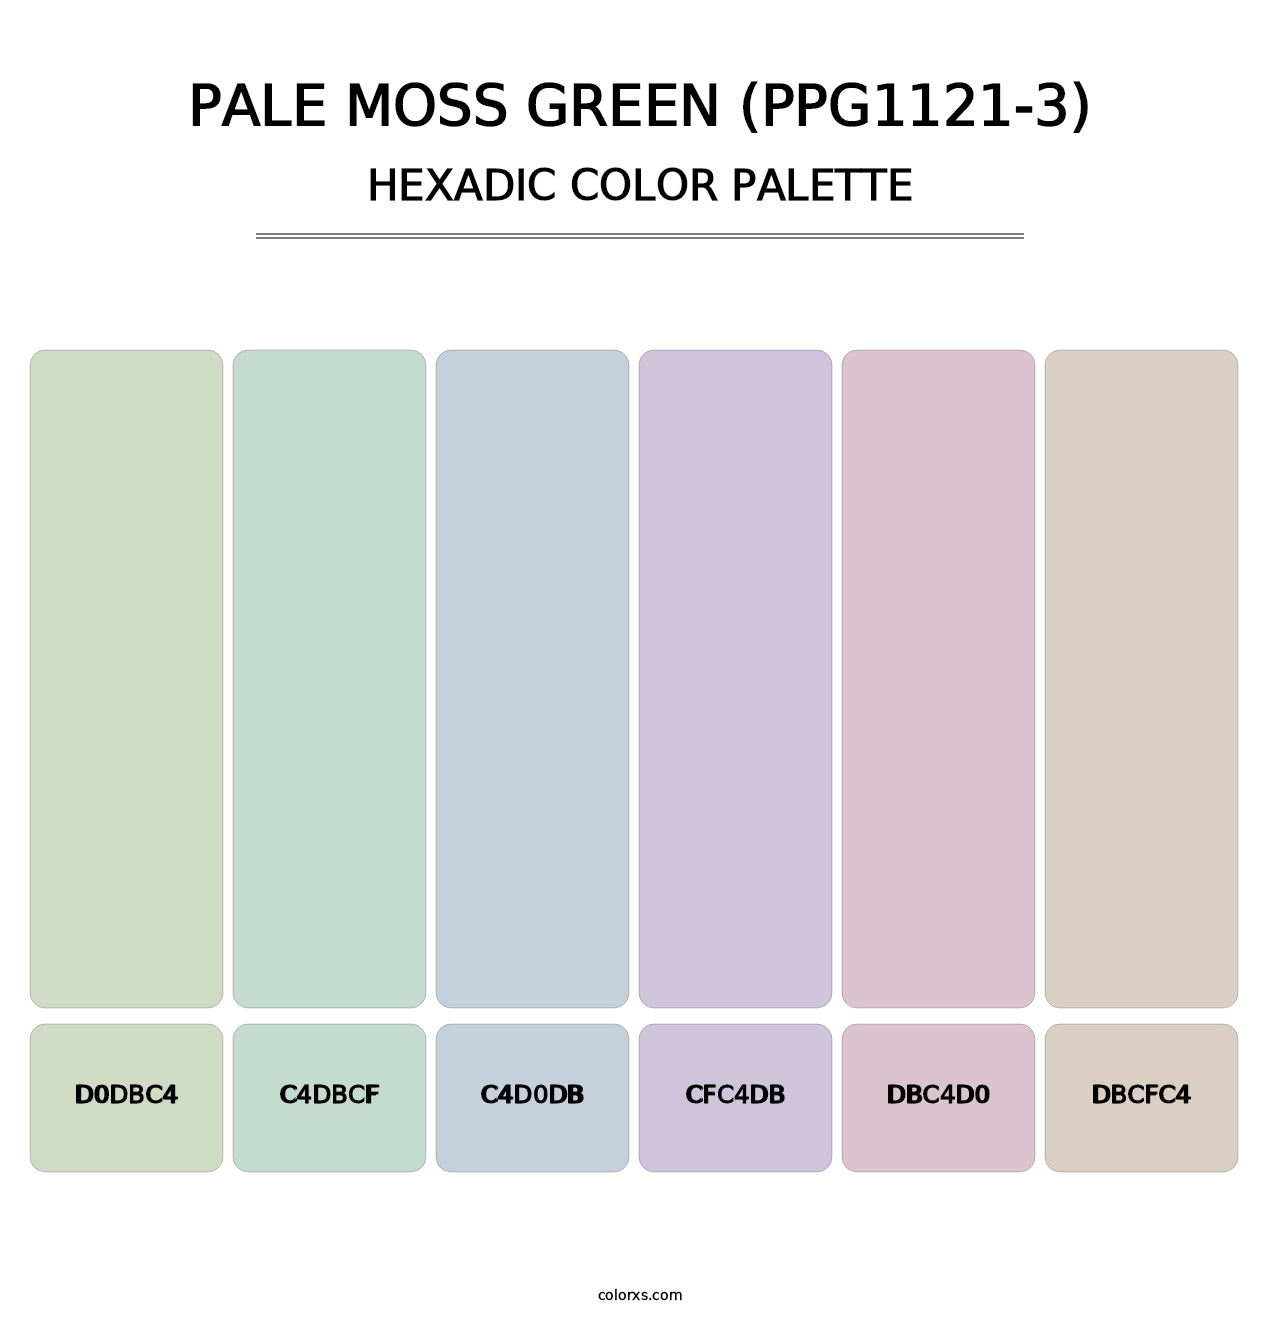 Pale Moss Green (PPG1121-3) - Hexadic Color Palette